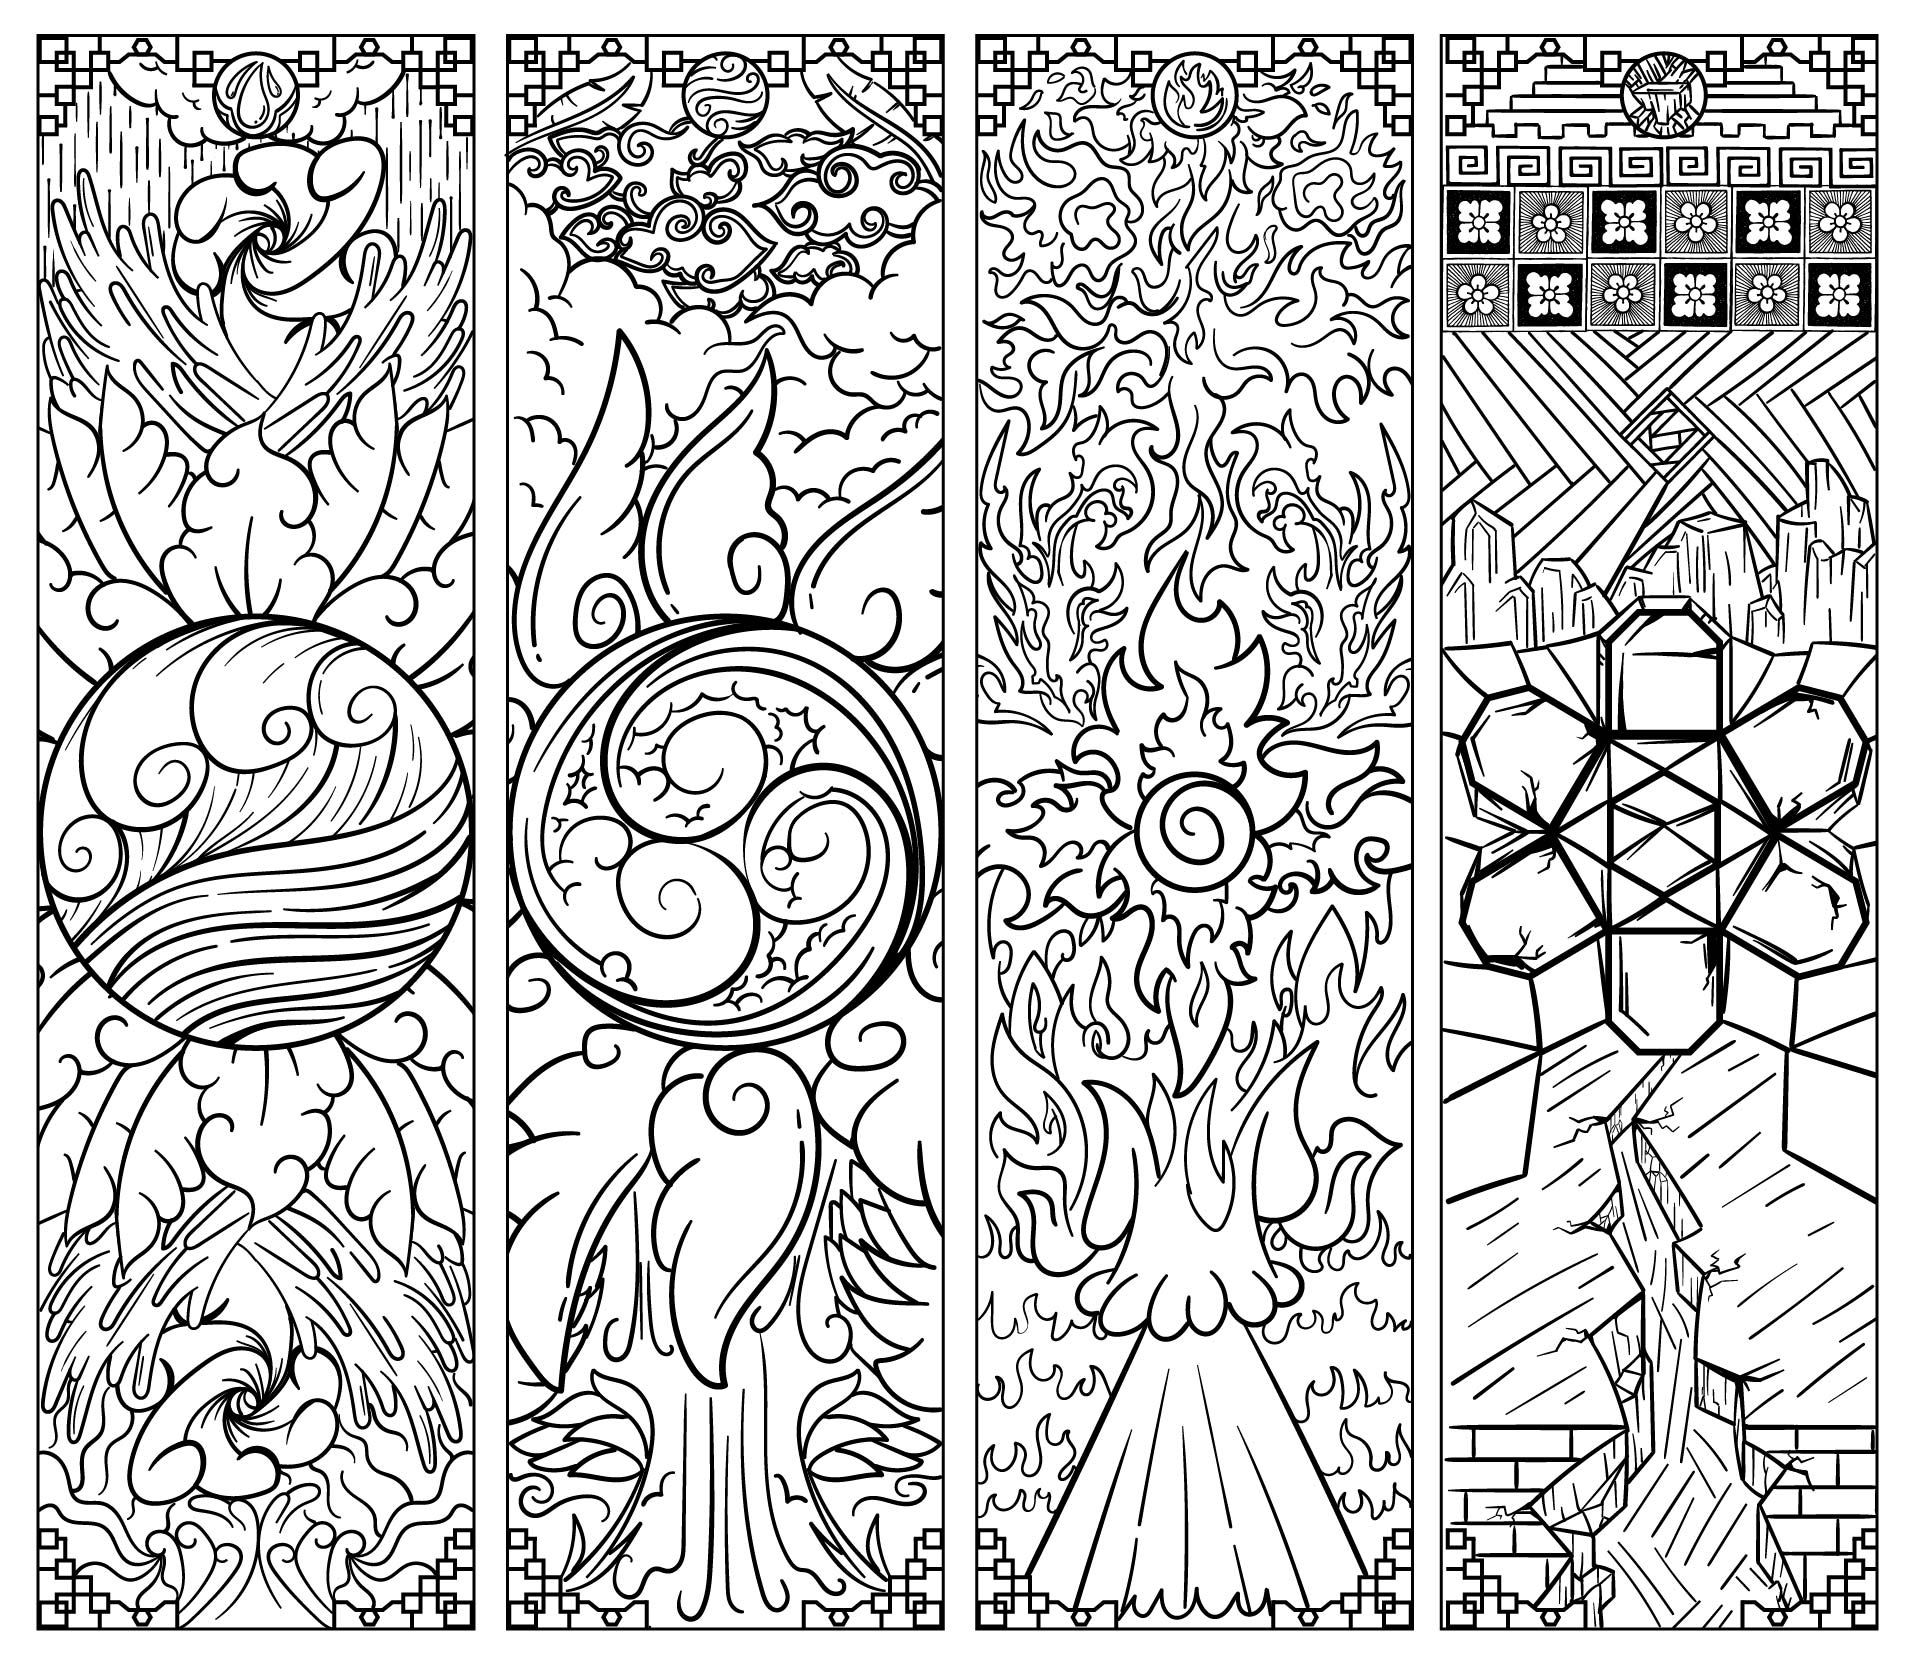 Bookmarks You Can Print and Color